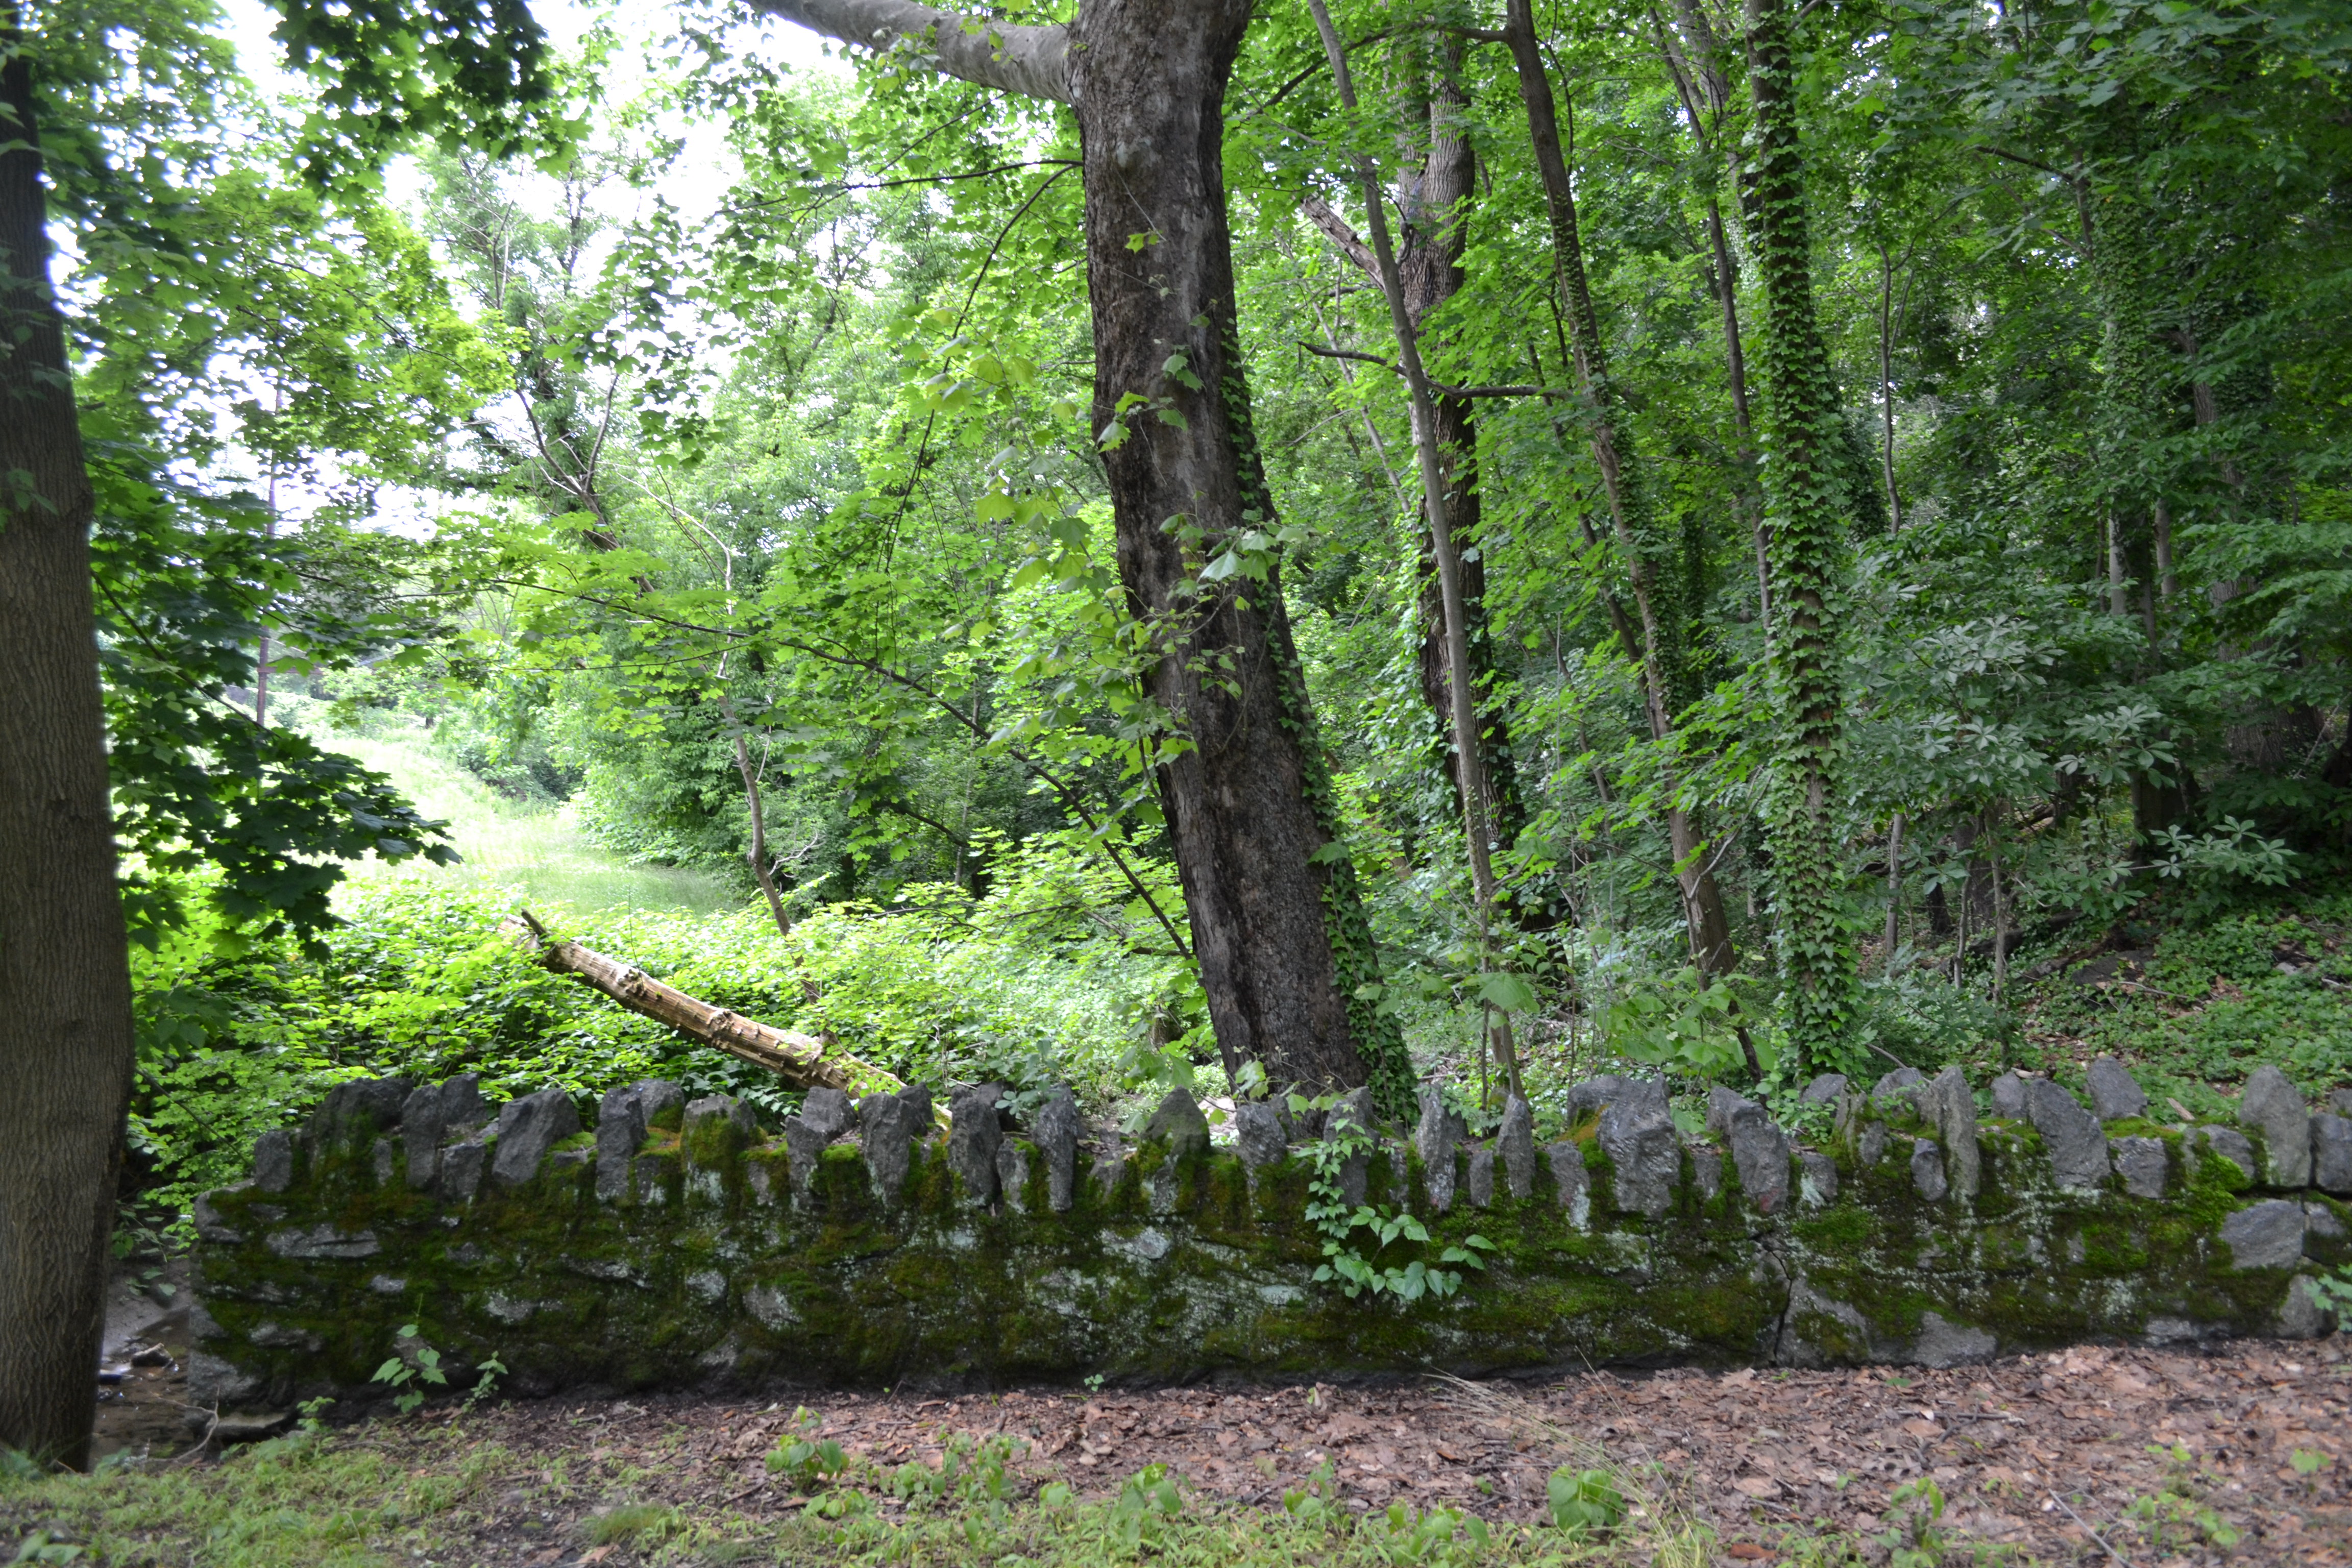 An old bridge across Vine Creek hides in a shady area next to the trail